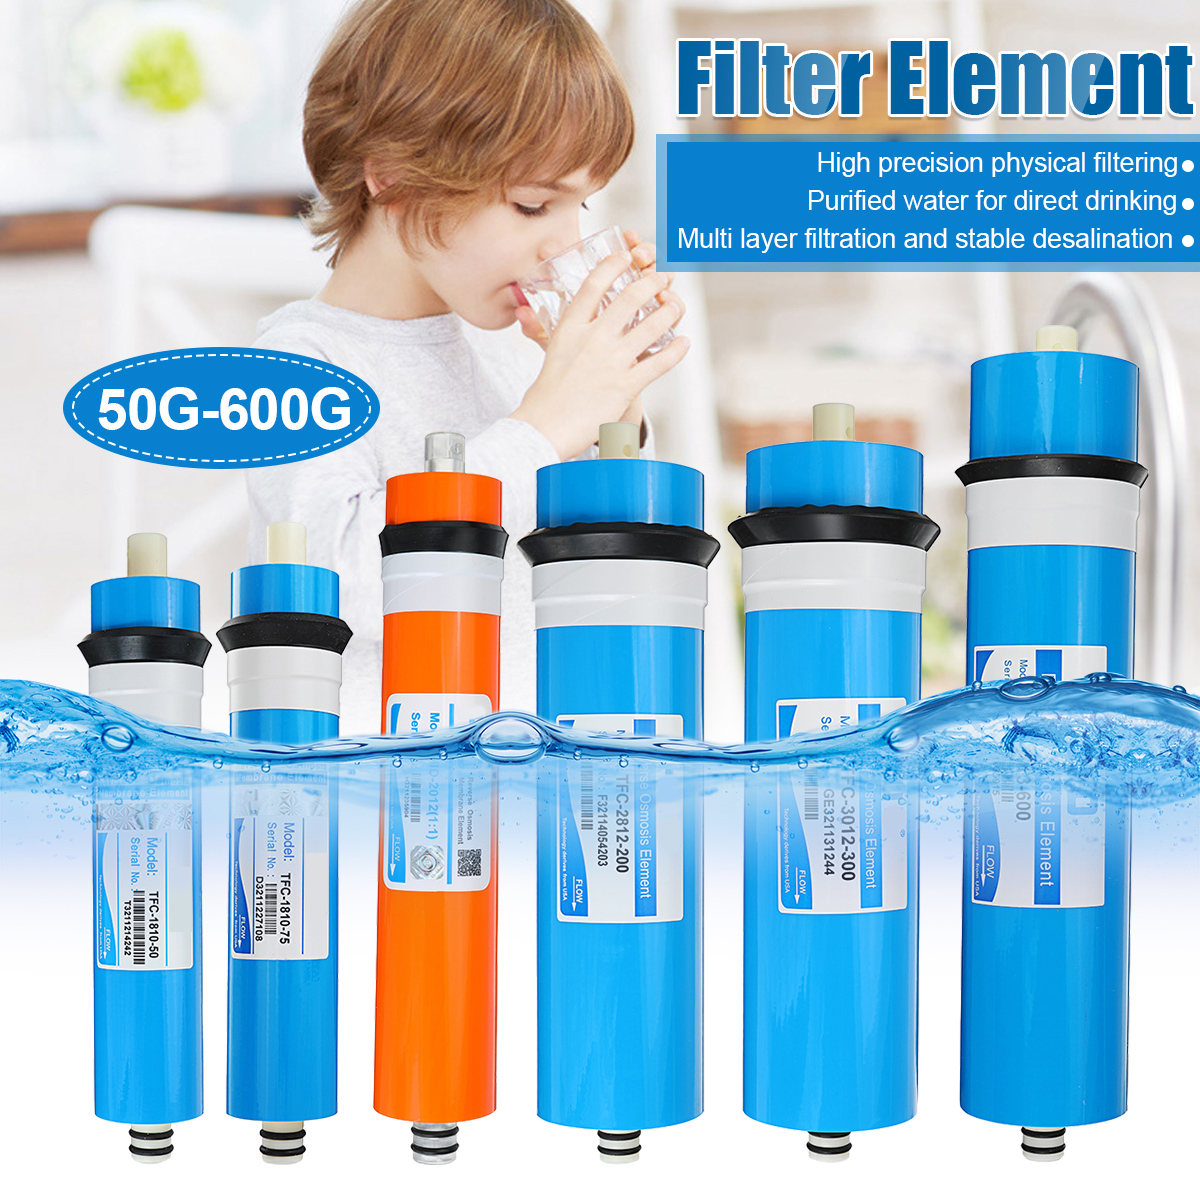 Reverse-Osmosis-Water-System-Filter-Element-Drinking-Treatment-Purifier-1695659-1